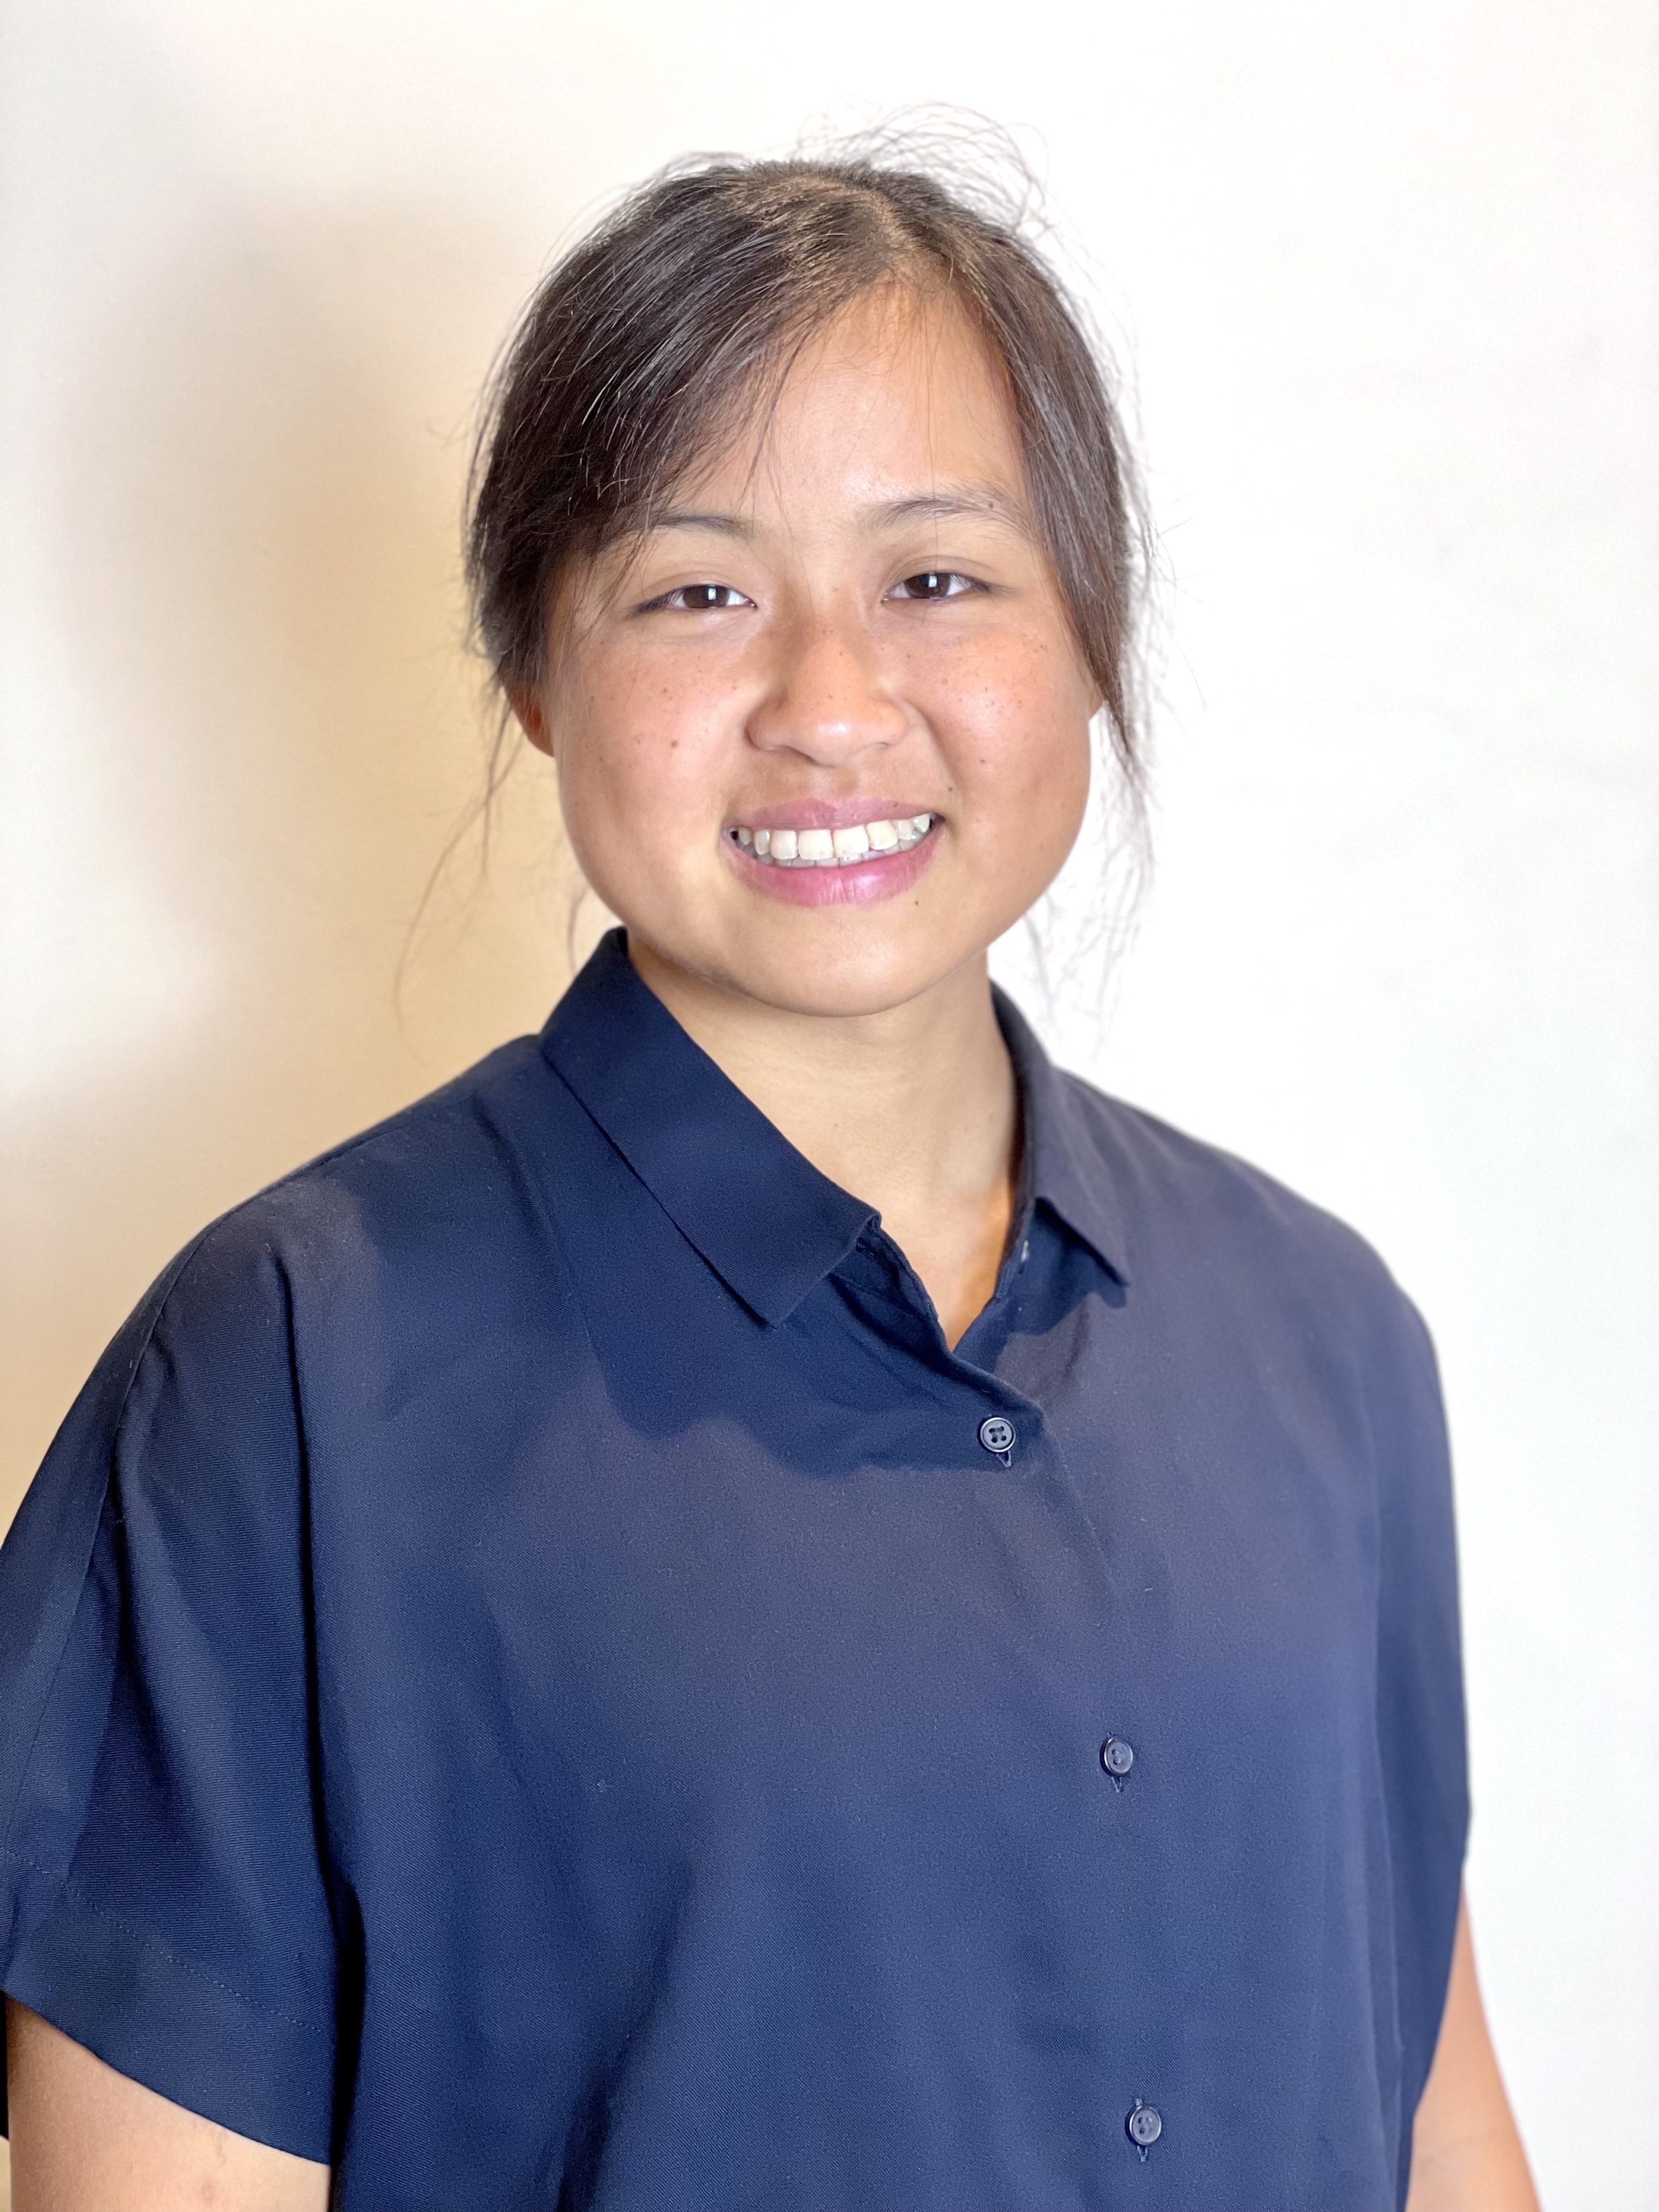 Profile Photo: Jiayee Yang is a physiotherapist in Newstead Brisbane